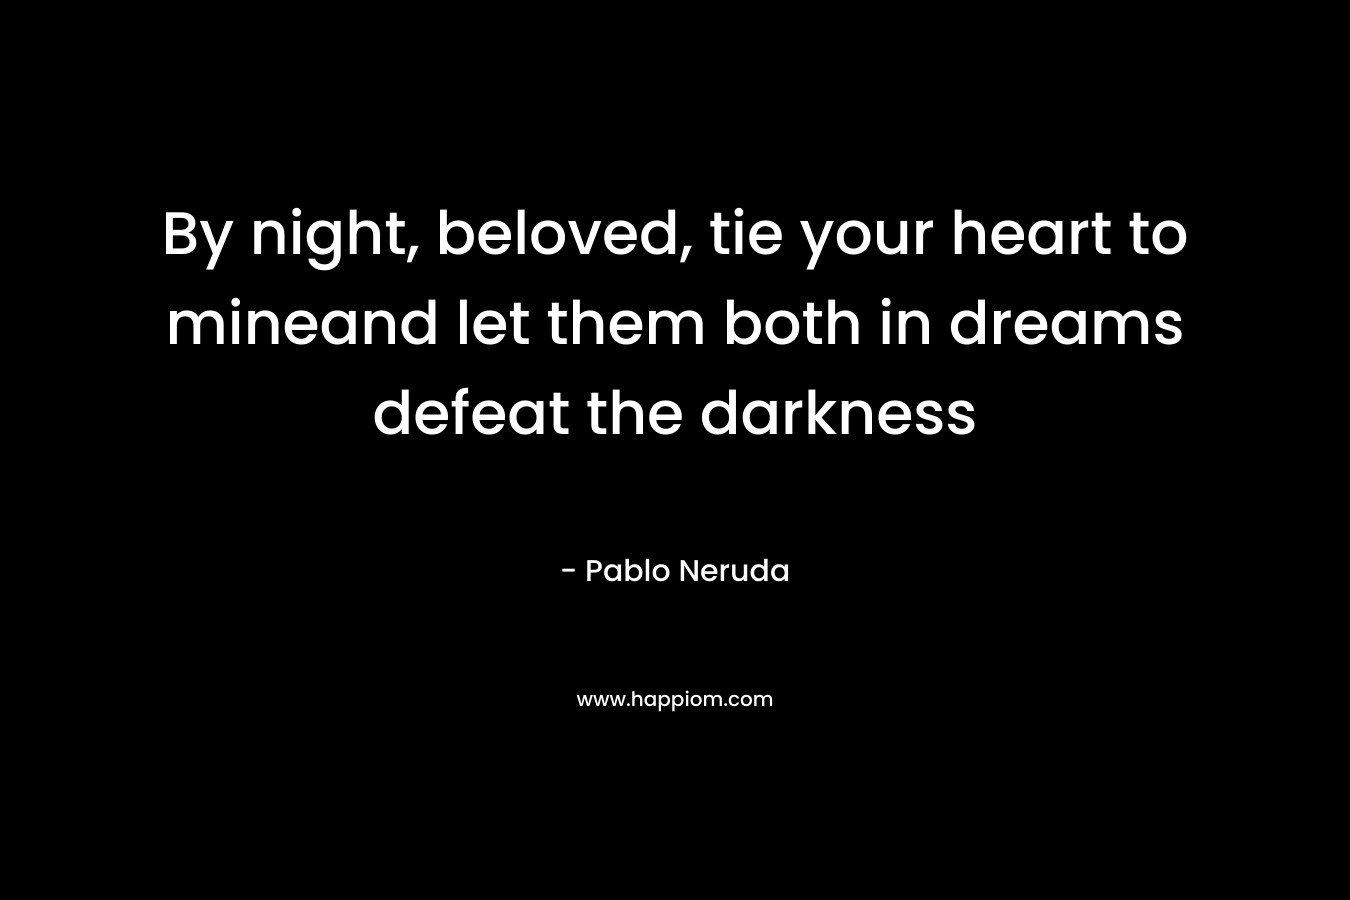 By night, beloved, tie your heart to mineand let them both in dreams defeat the darkness – Pablo Neruda